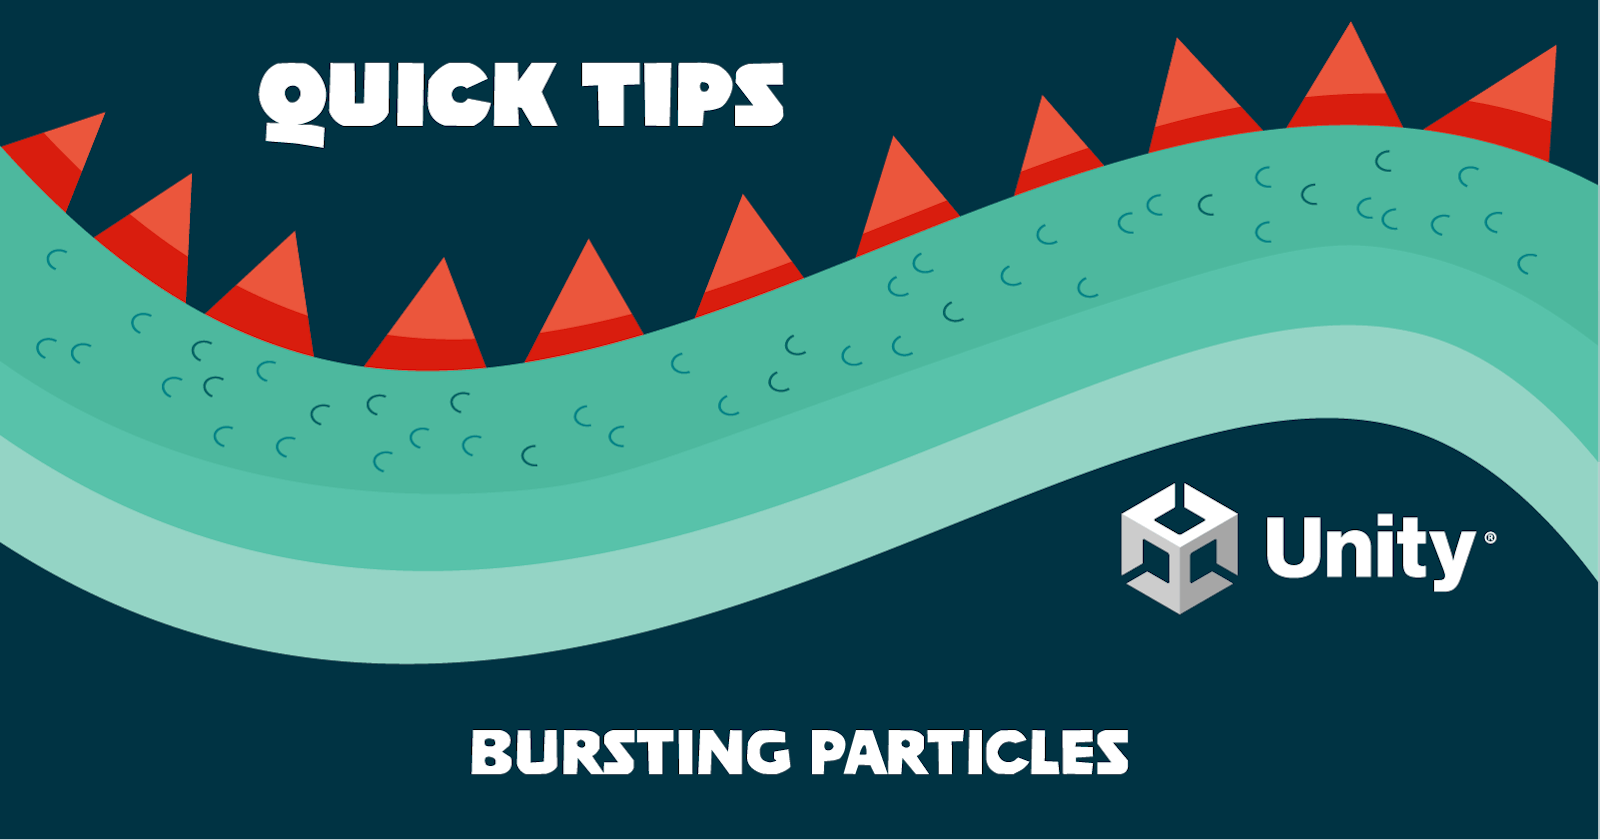 Burst Particles at Runtime with Unity